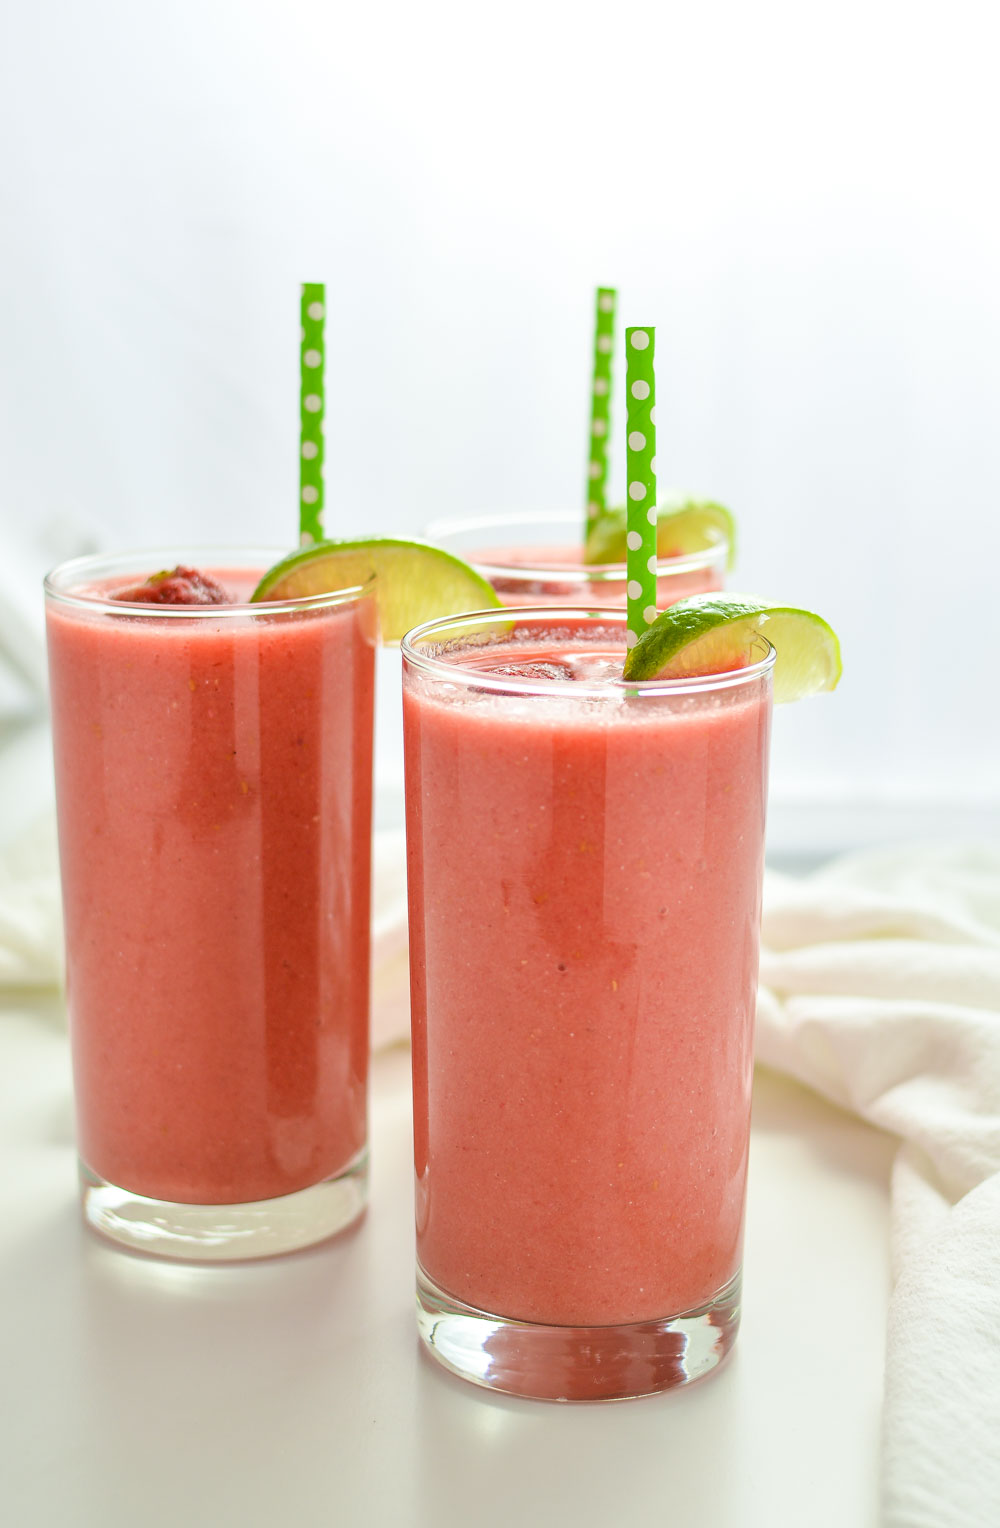 Triple Berry Limeade Smoothies - a tart, refreshing, and satisfying way to start your day!